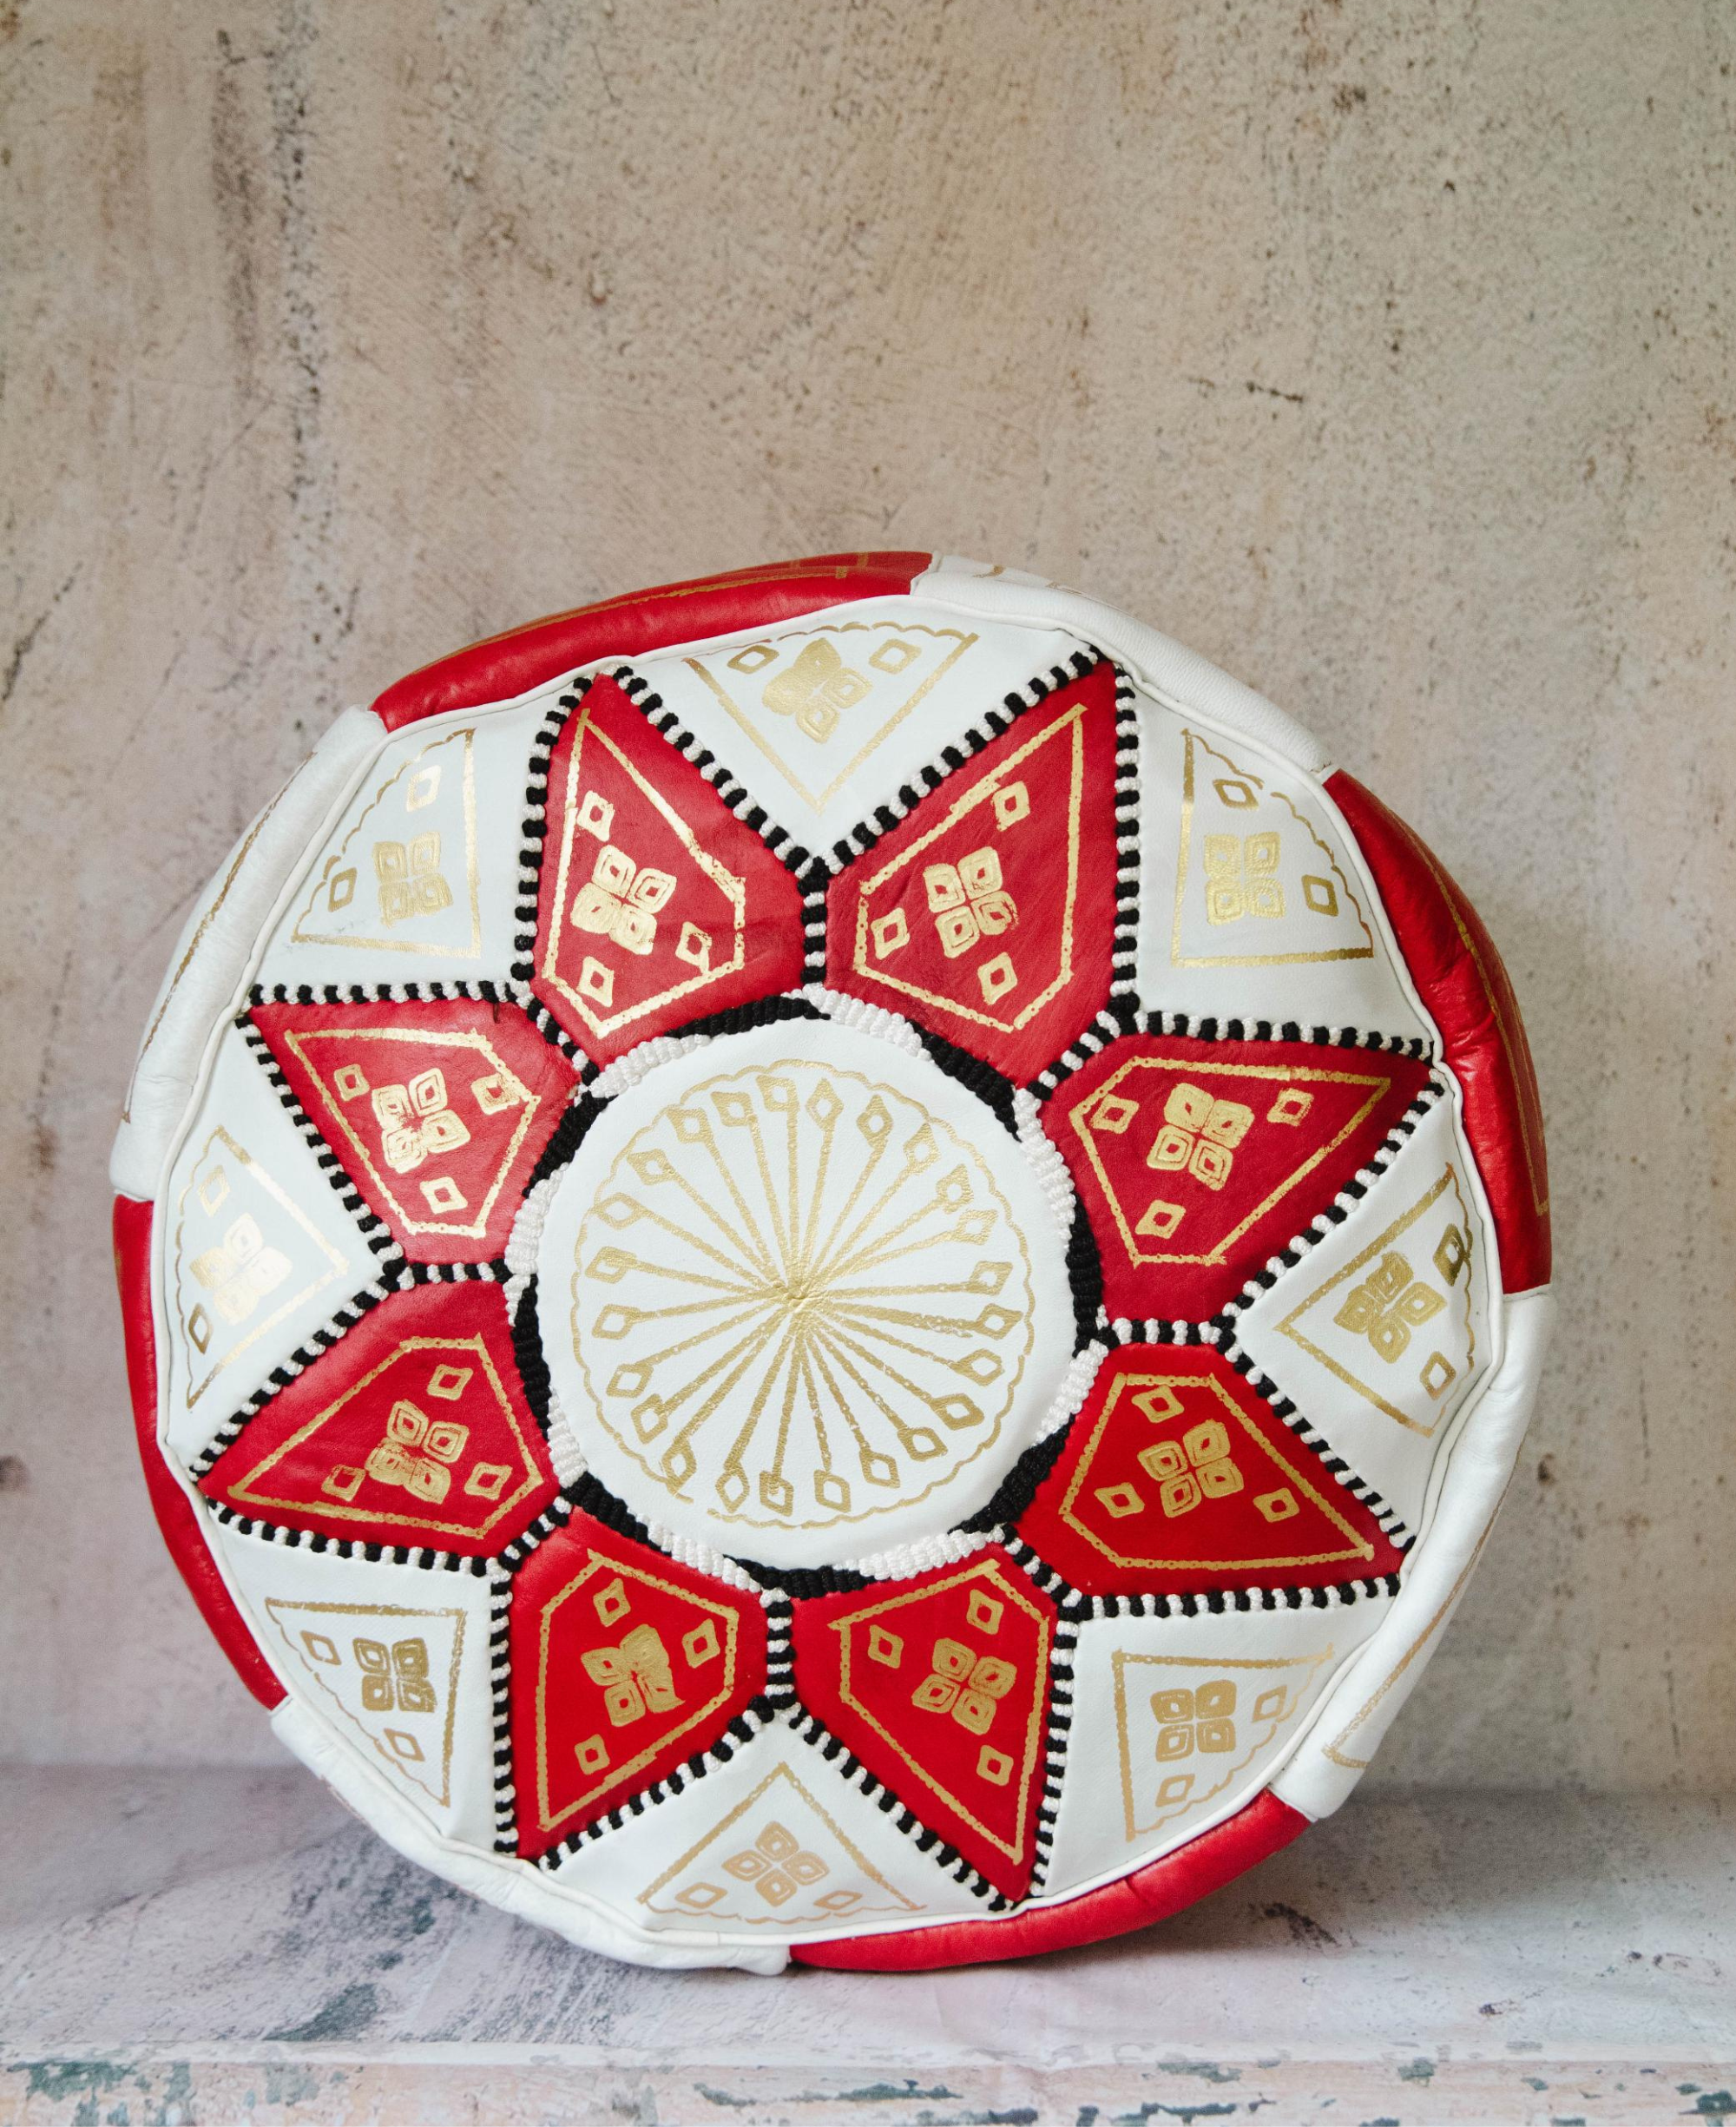 Moroccan Leather Pouf in Red & Gold - Leather Poufe Ottoman Moroccan Floor Pouffs, Morocco Pouffe - Ottomans Poufs -